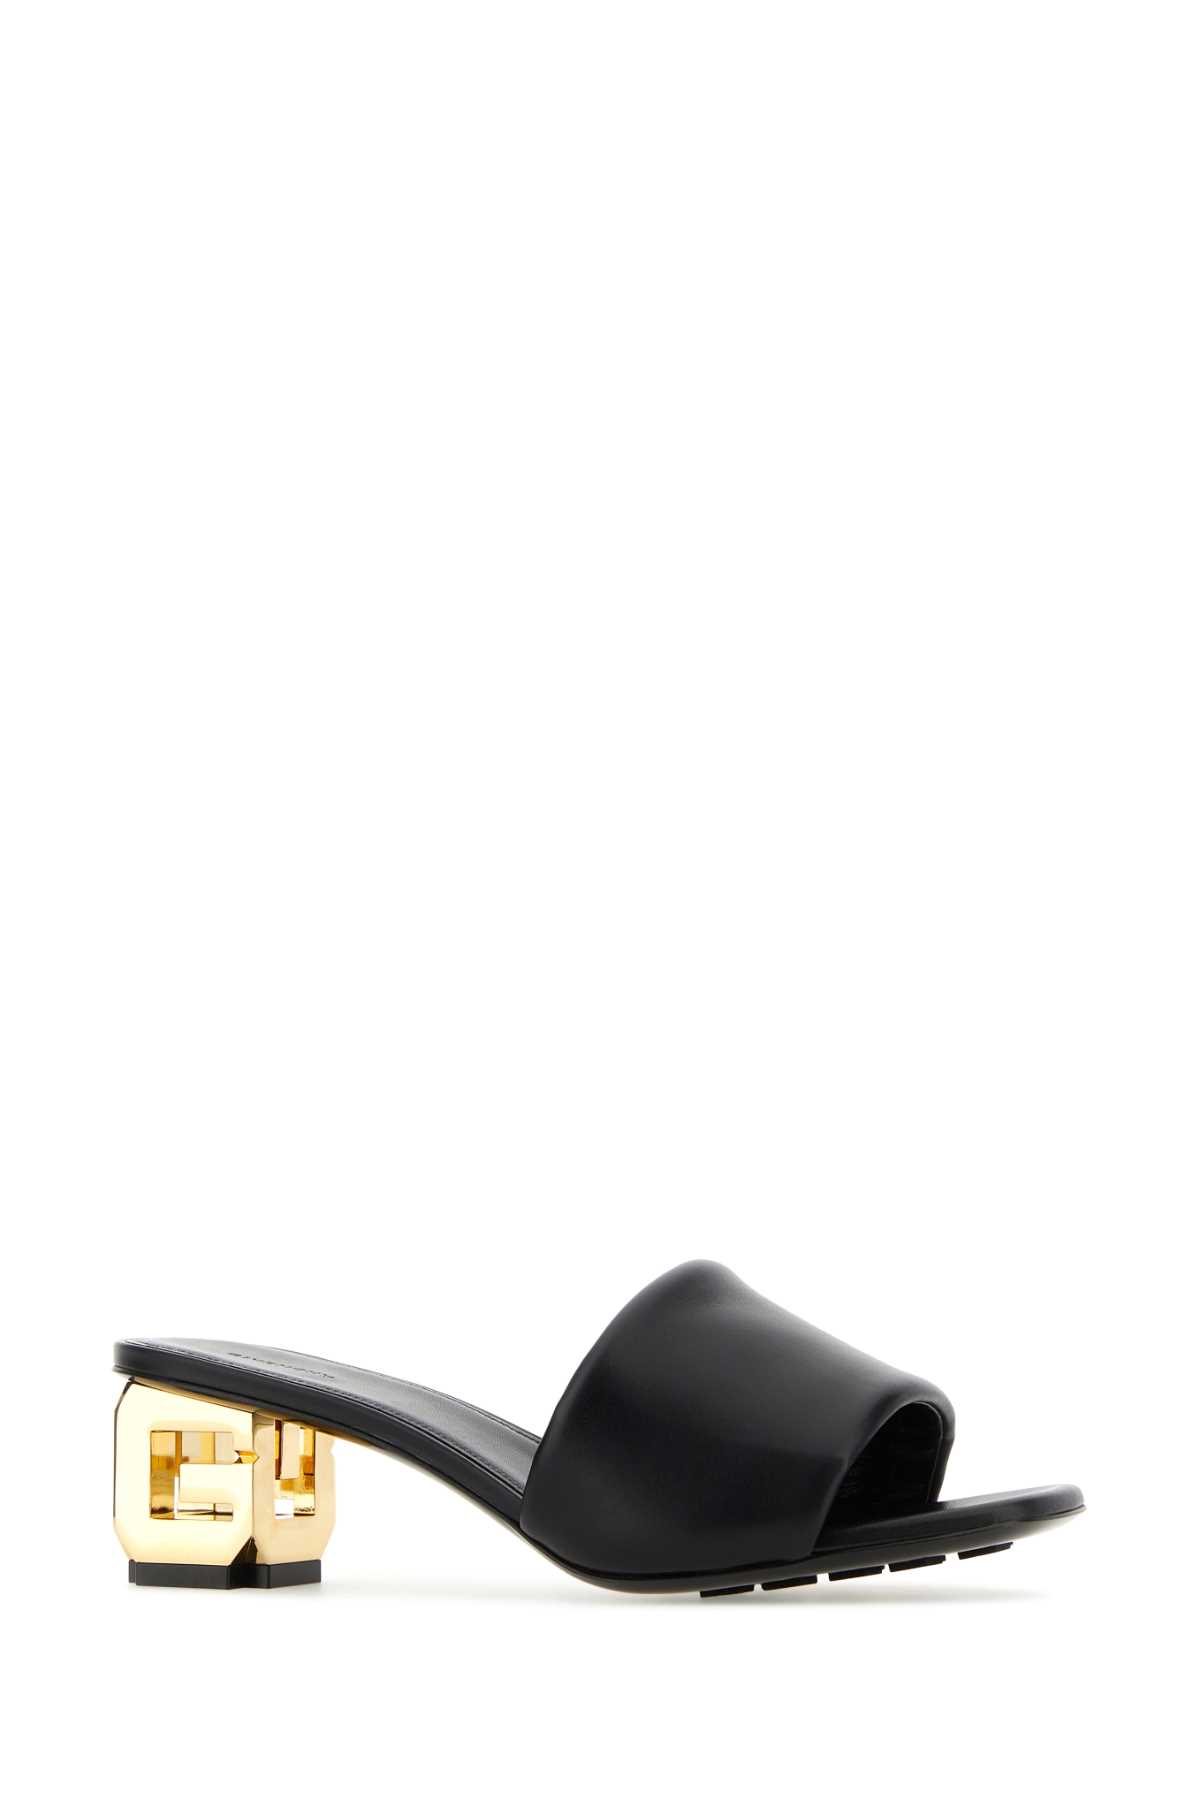 GIVENCHY BLACK LEATHER G CUBE MULES